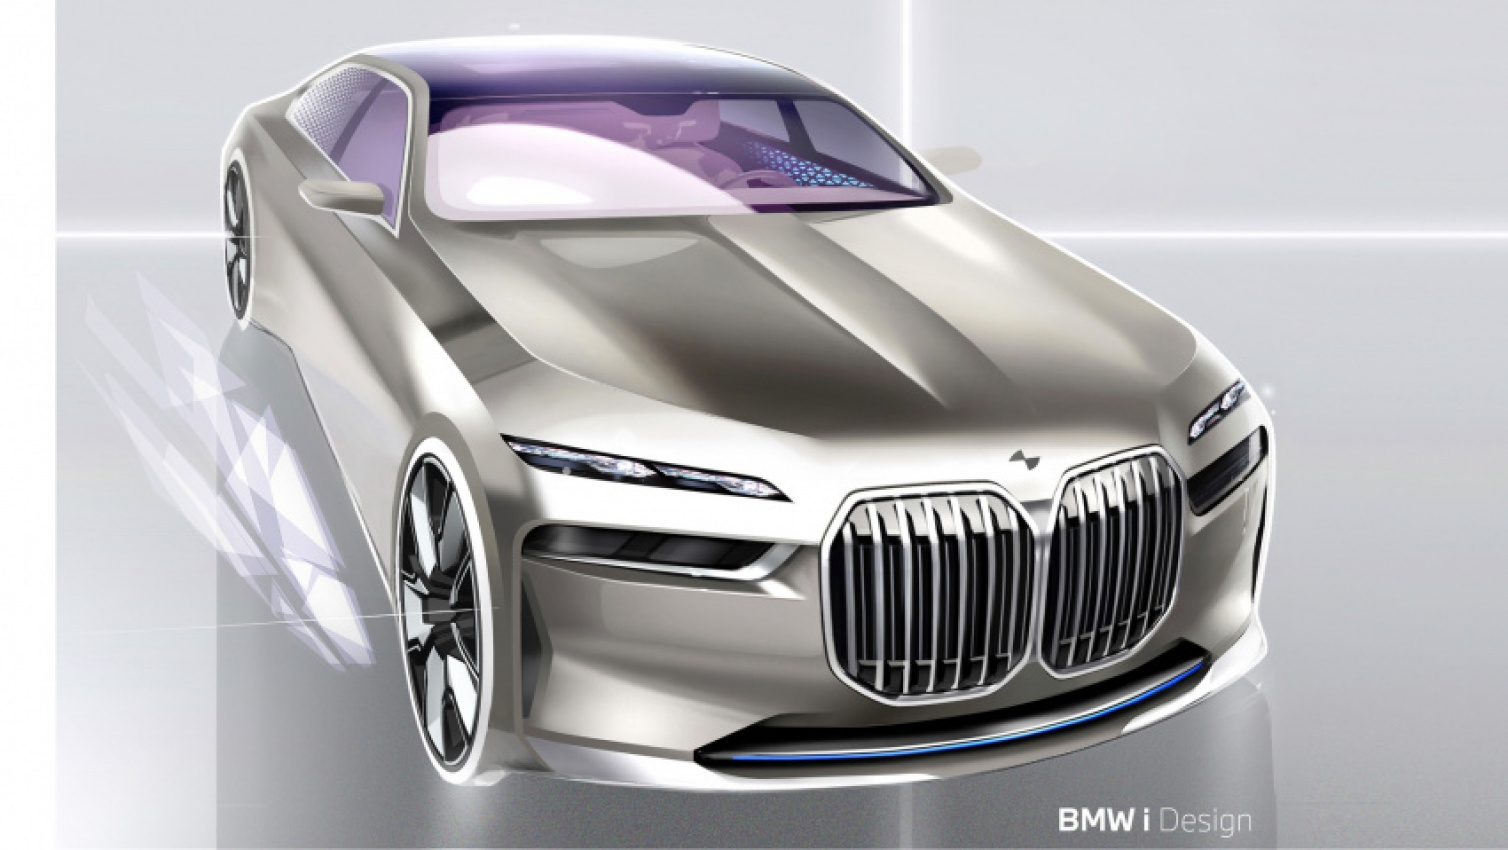 autos, bmw, cars, 7 series g70, bmw 7 series g70, bmw i7, m760e, 2023 bmw 7 series revealed: bigger, bolder, and packed with screens